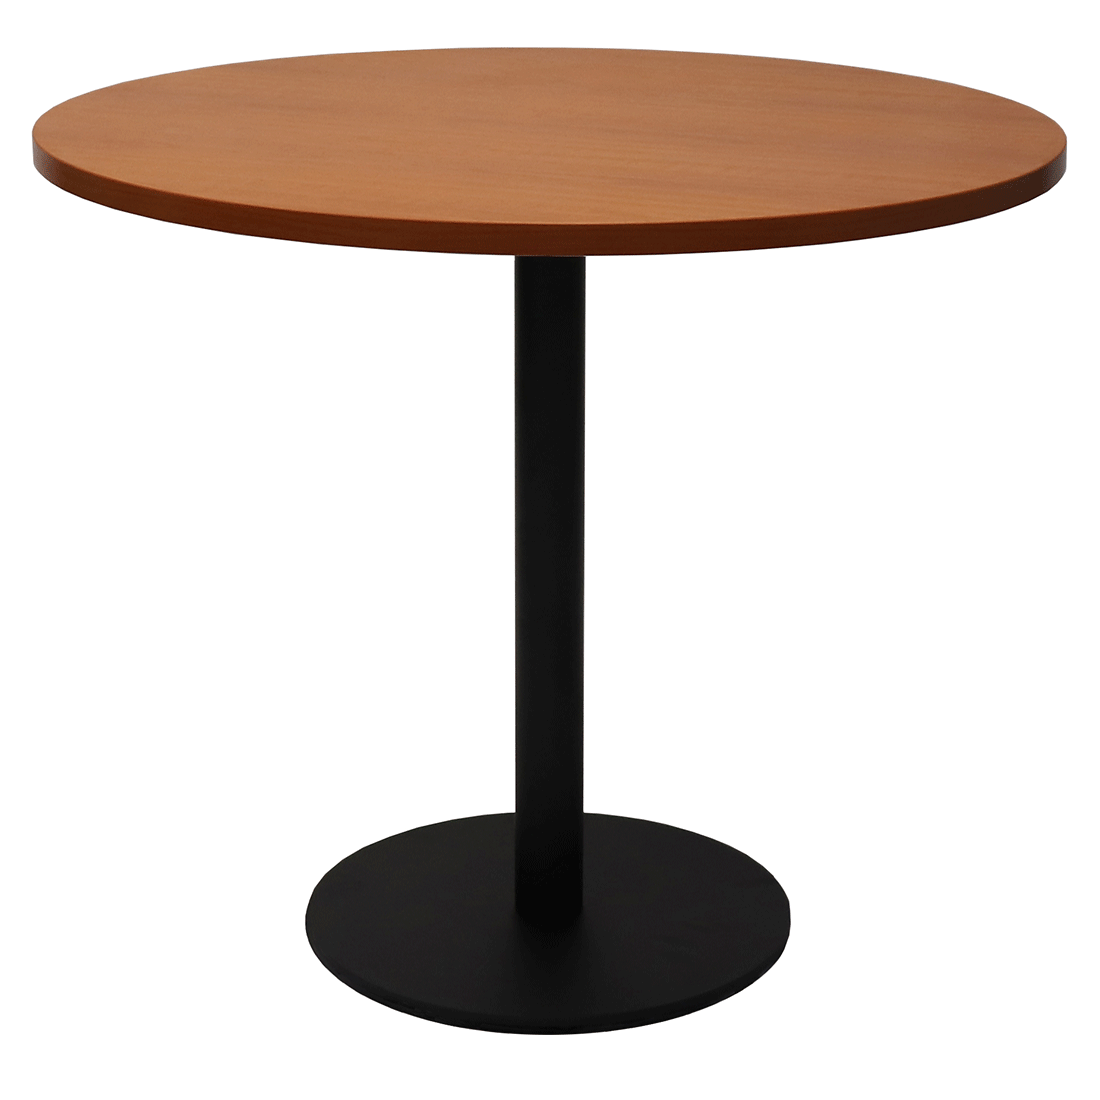 Switch Round Meeting Table 900mm